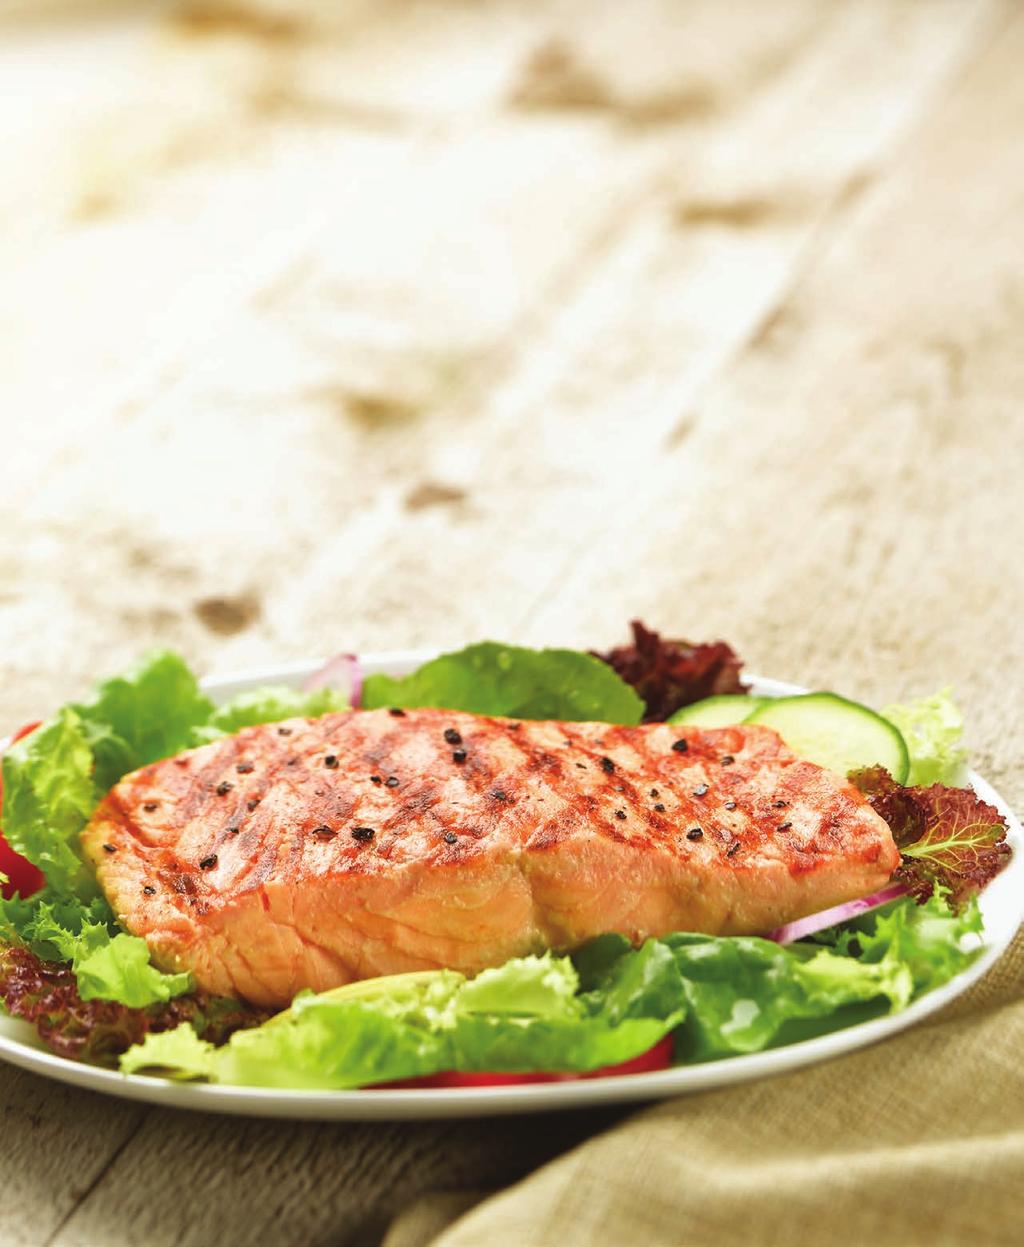 Recipe Get Out the Grill for Mediterranean-style Grilled Salmon Fish